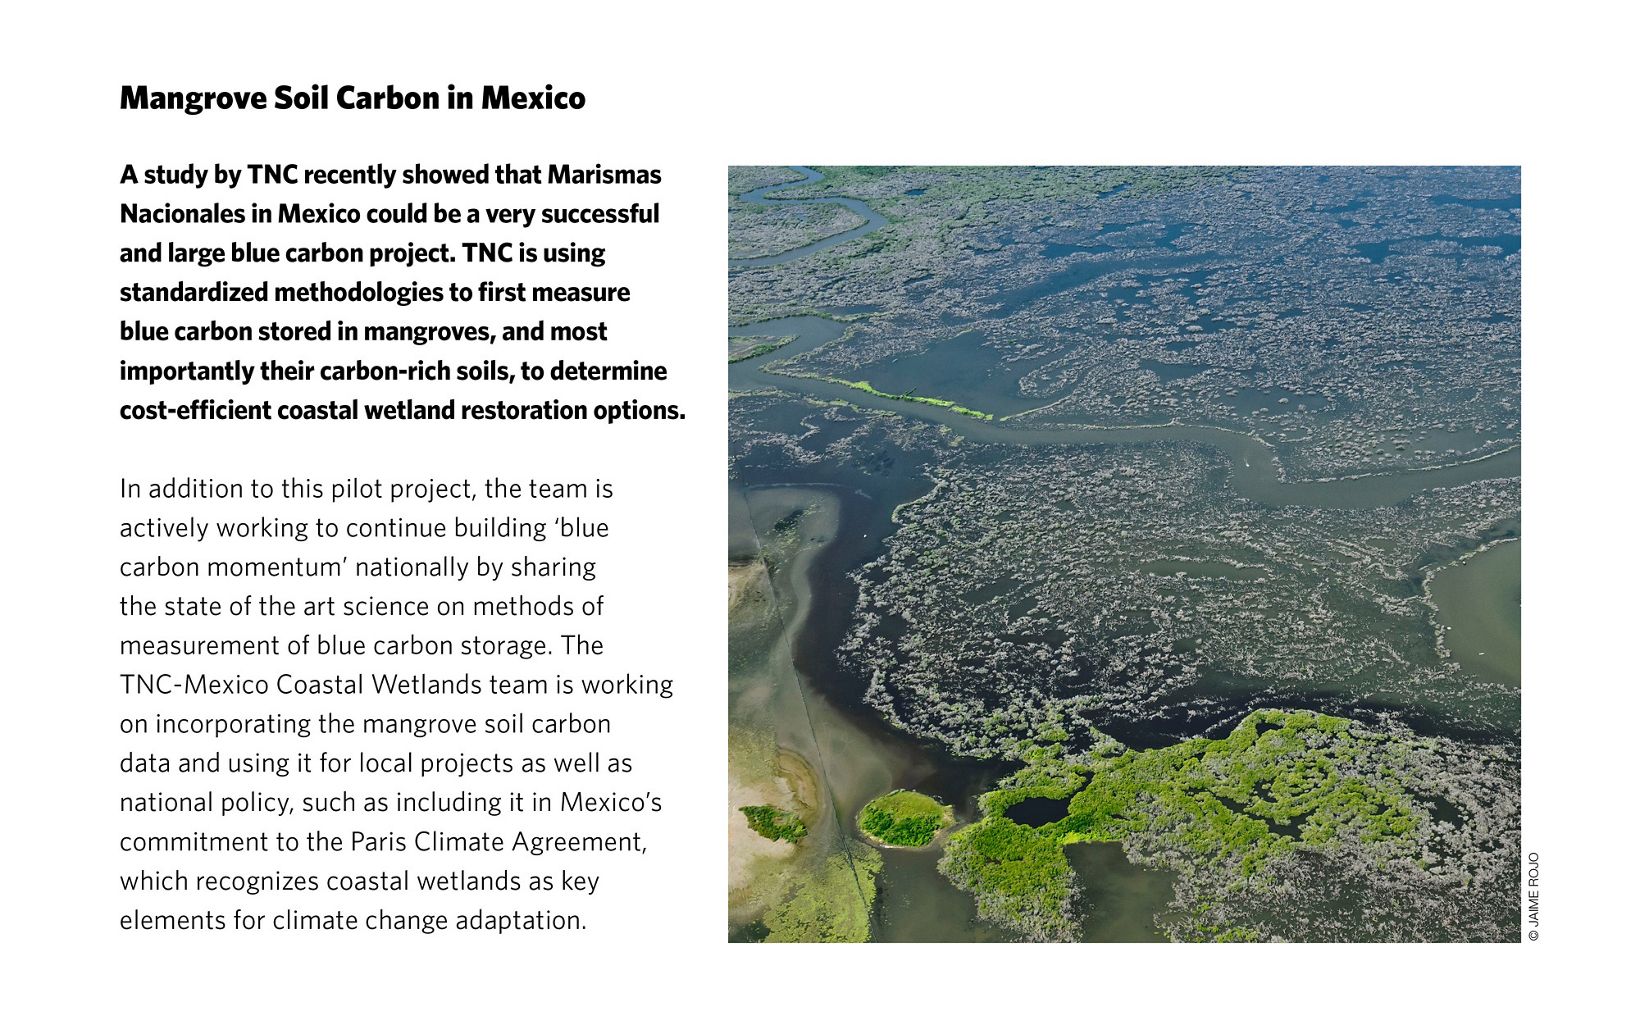 Mangrove Soil Carbon in Mexico Marismas Nacionales could be a very successful blue carbon project 